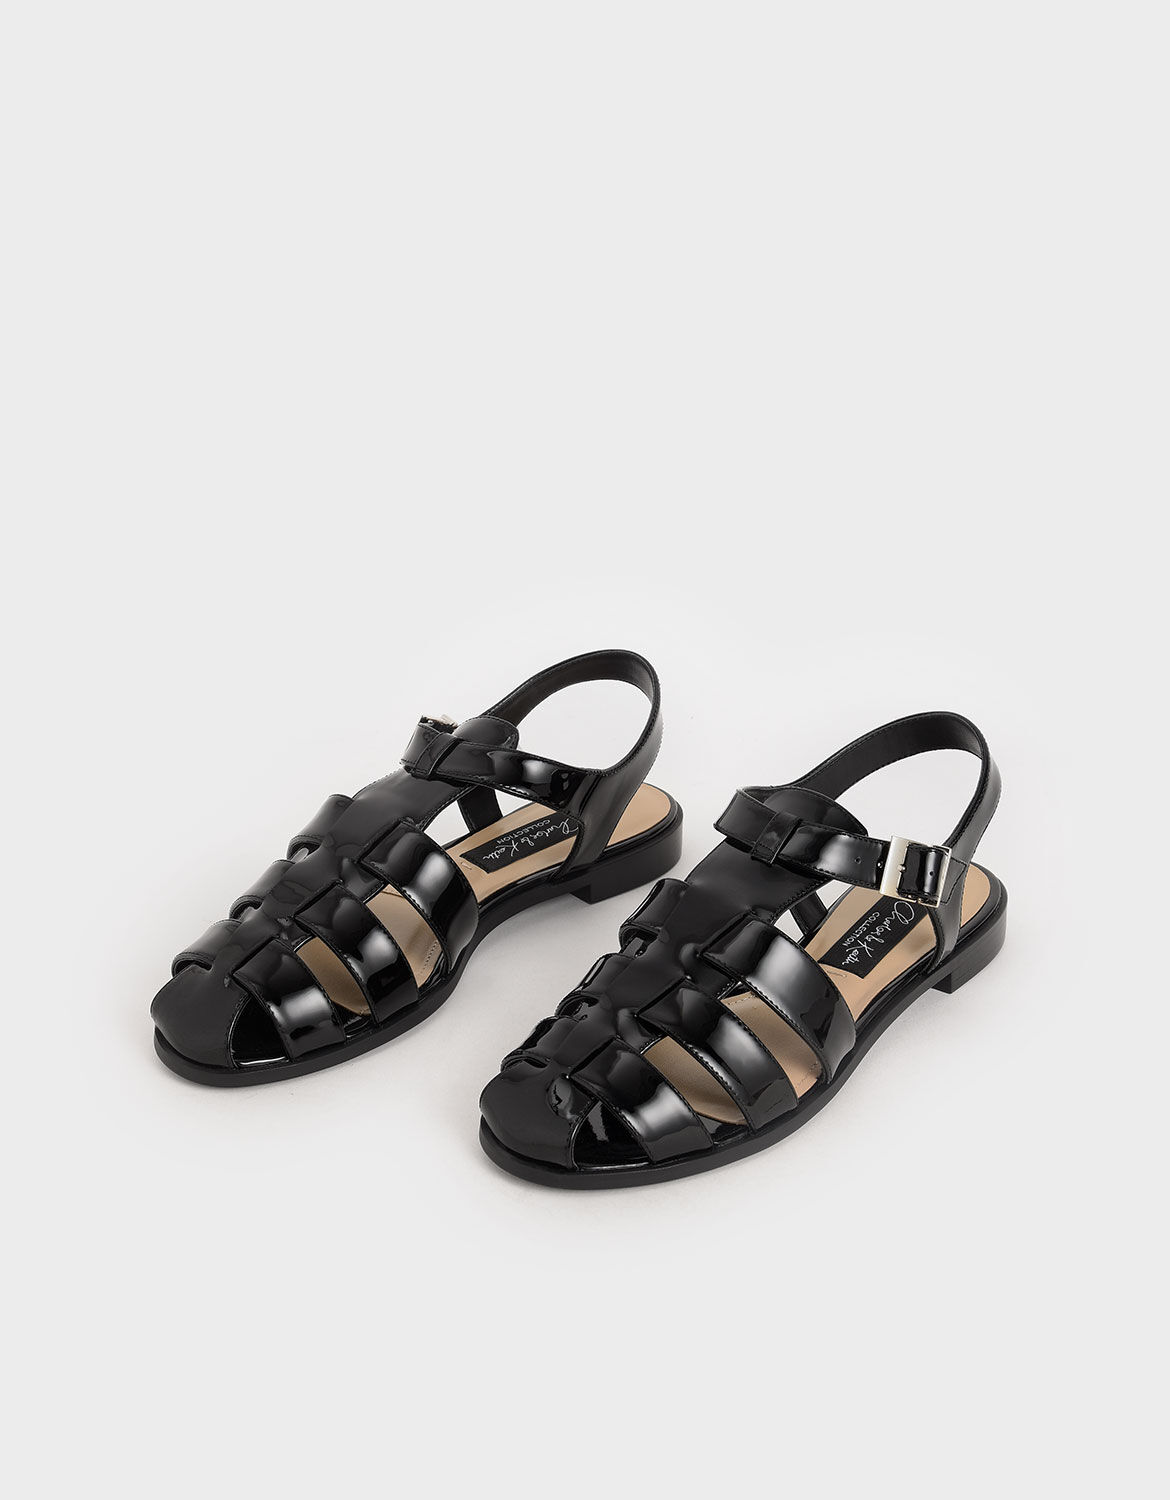 Black Patent Leather Caged Sandals 